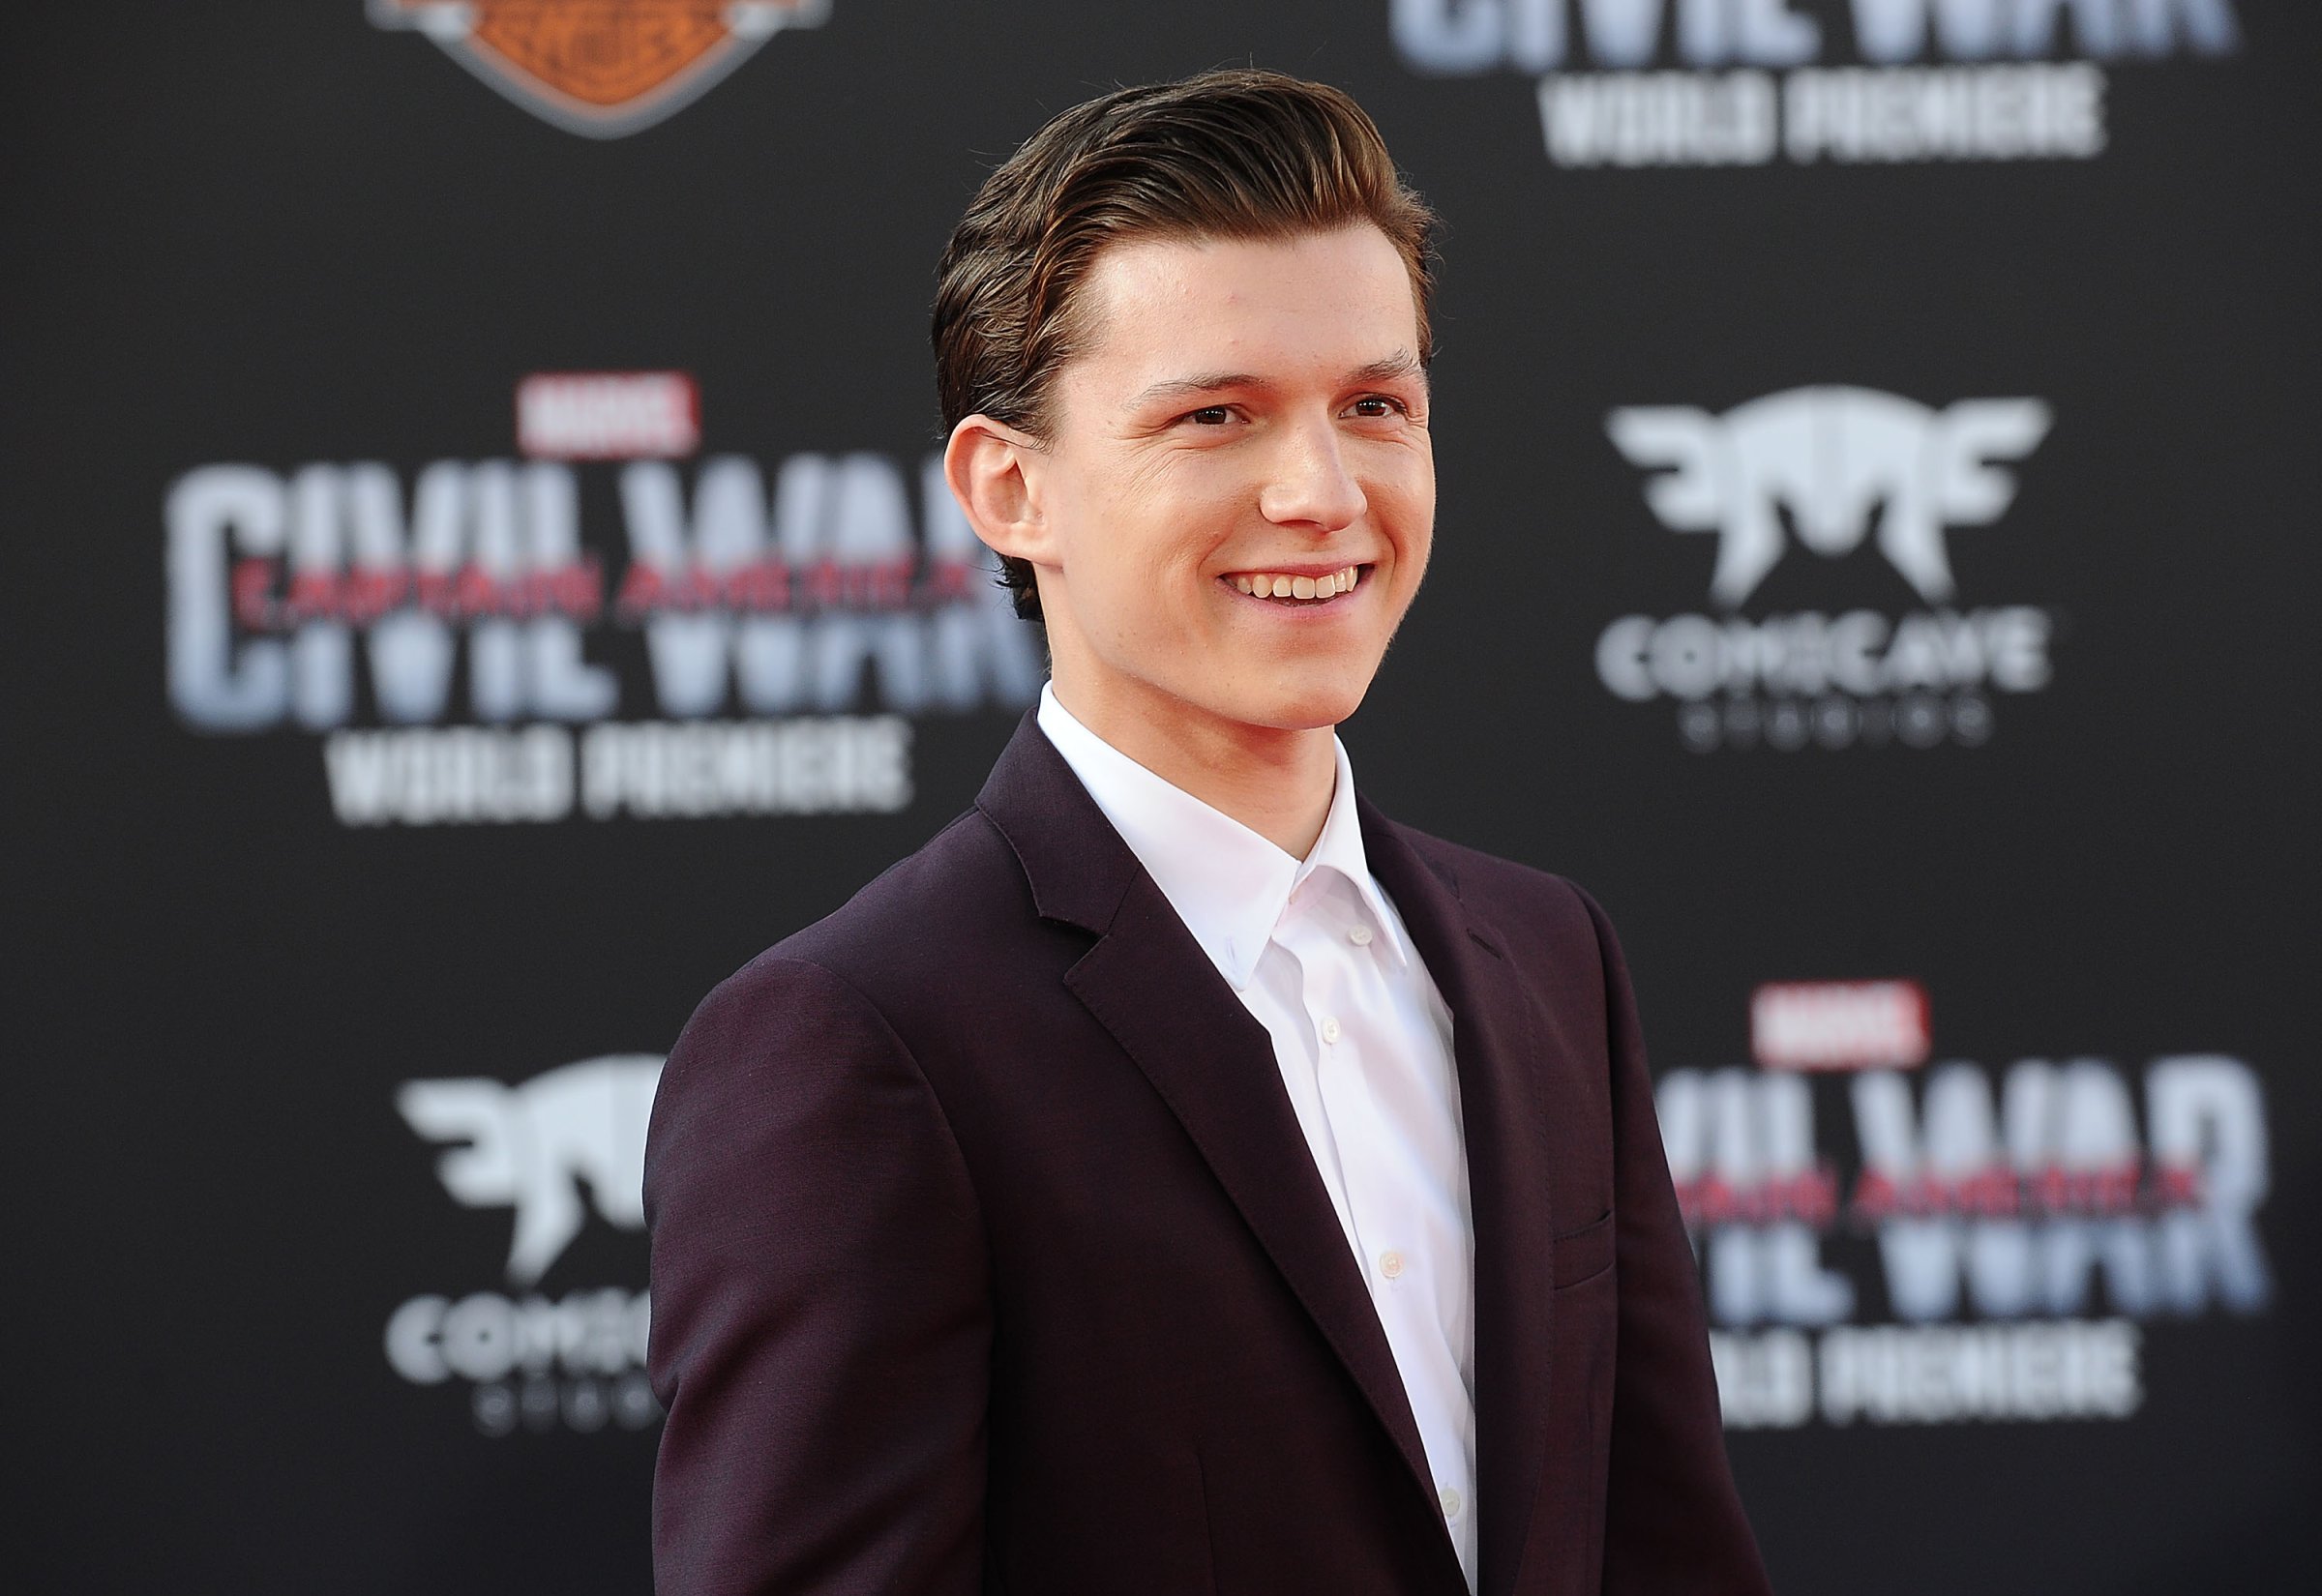 Actor Tom Holland attends the premiere of "Captain America: Civil War" at Dolby Theatre on April 12, 2016 in Hollywood, California.